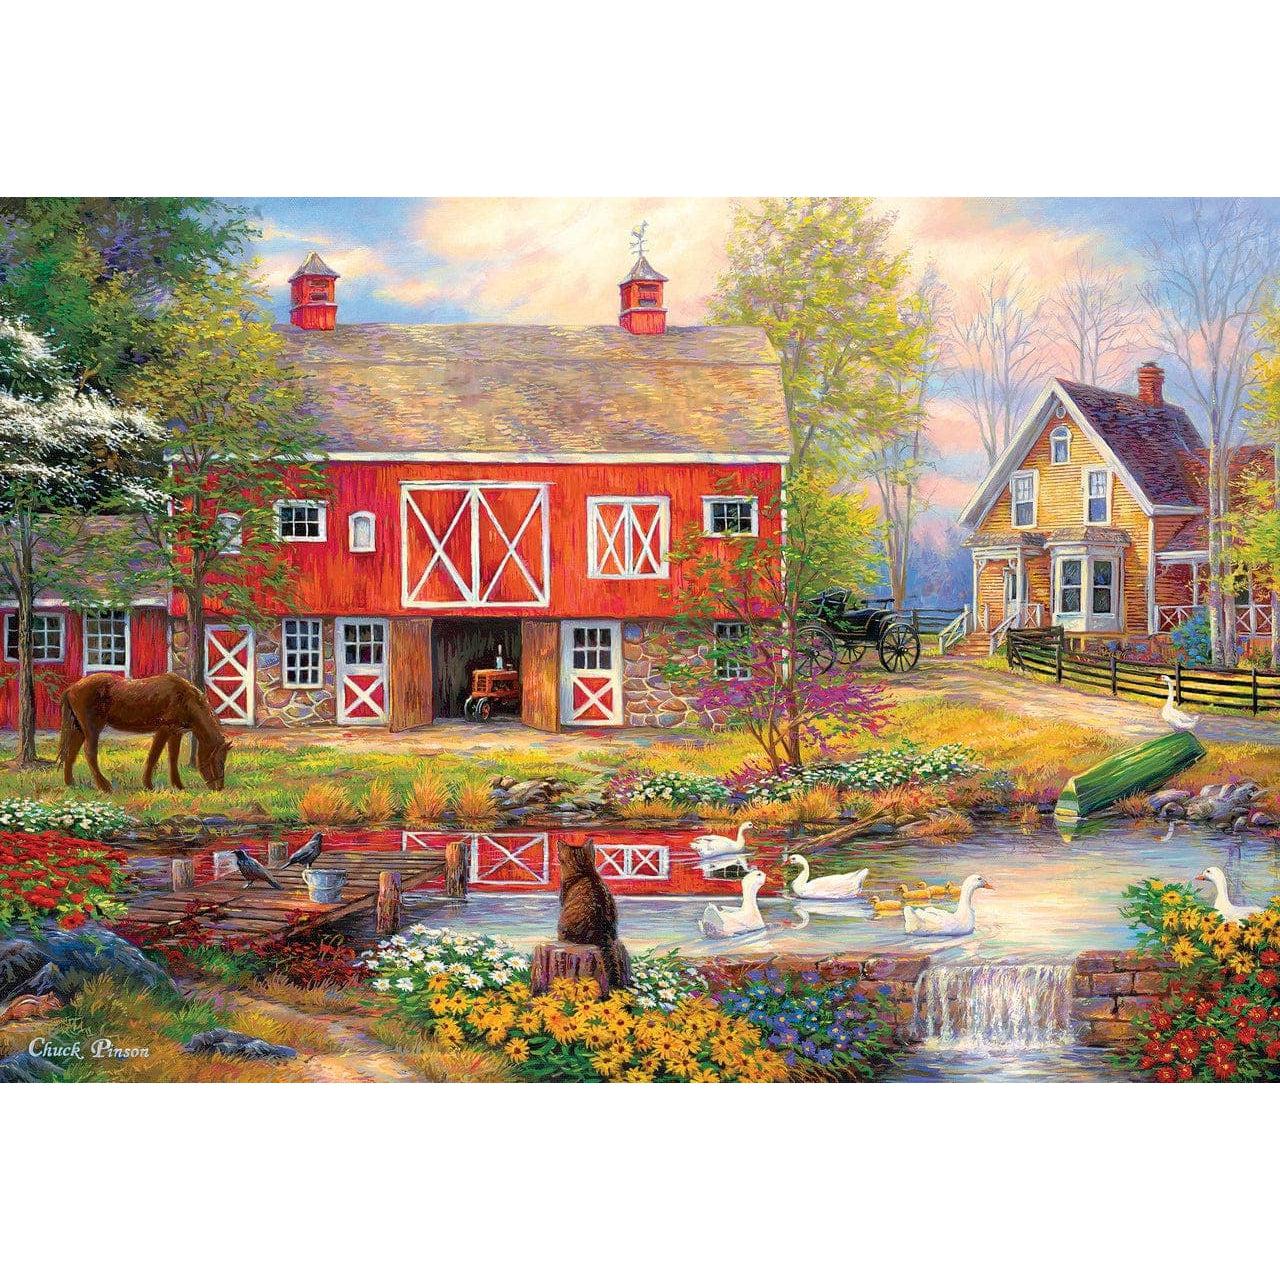 MasterPieces-Signature Collection - Reflections on Country Living - 2000pc Puzzle-72047-Legacy Toys